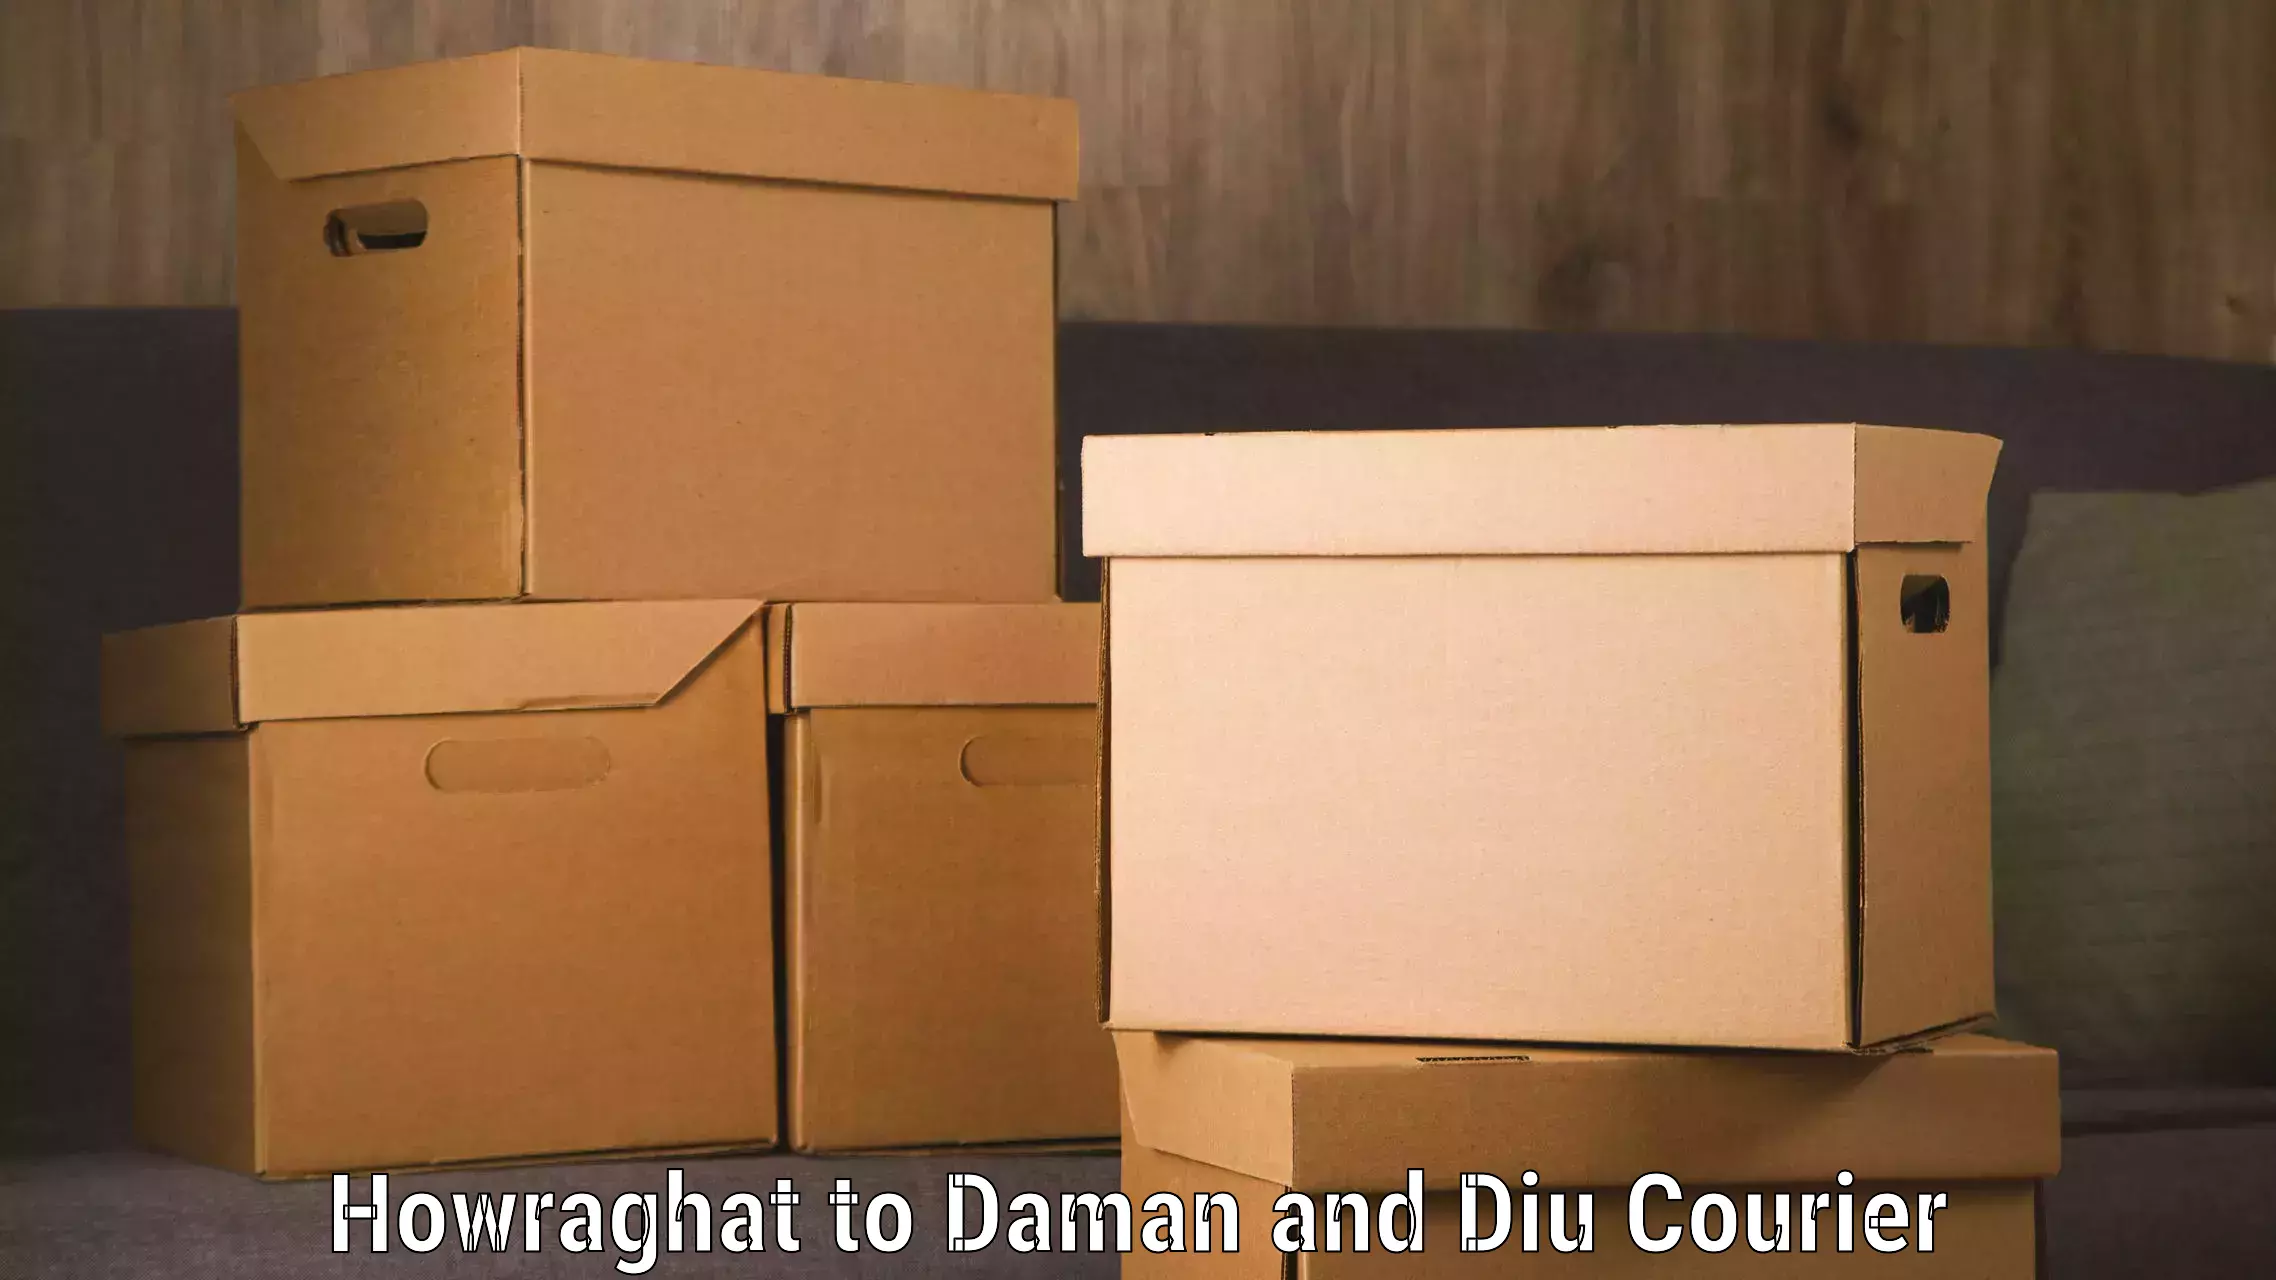 Online luggage shipping Howraghat to Diu